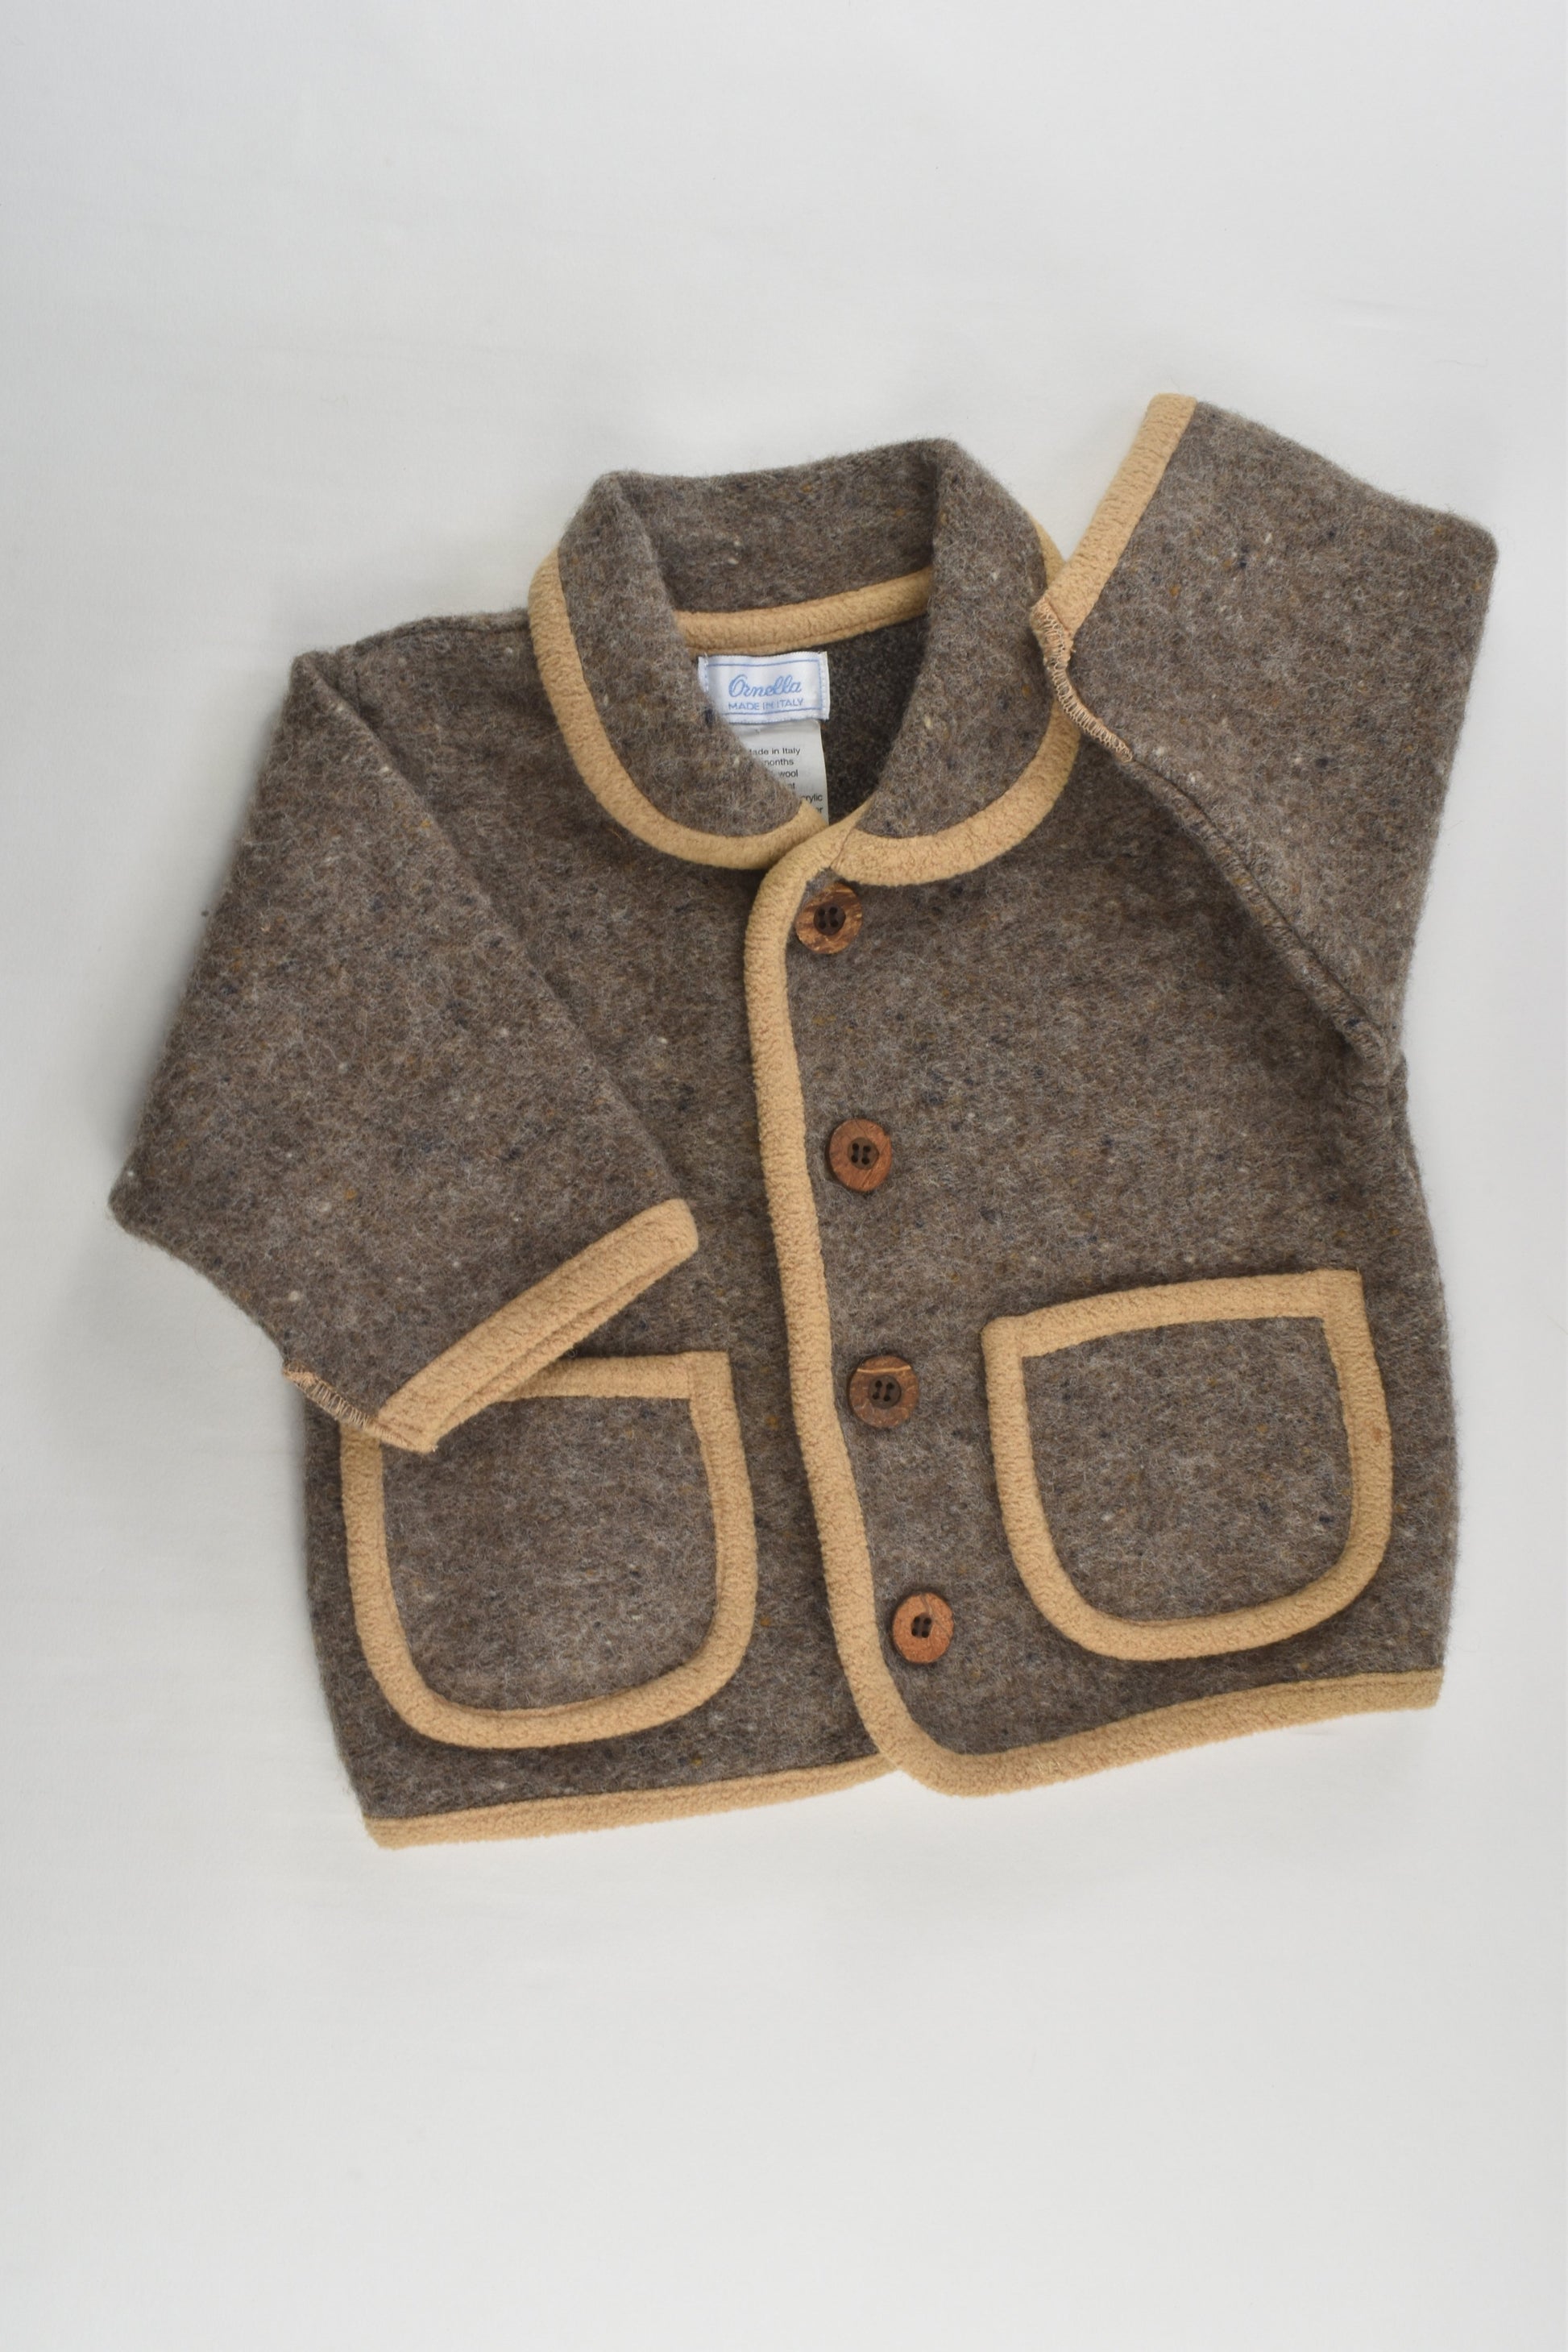 Ornella (Italy) Size 0 (9 months) Dogs and Snow Wool Jacket